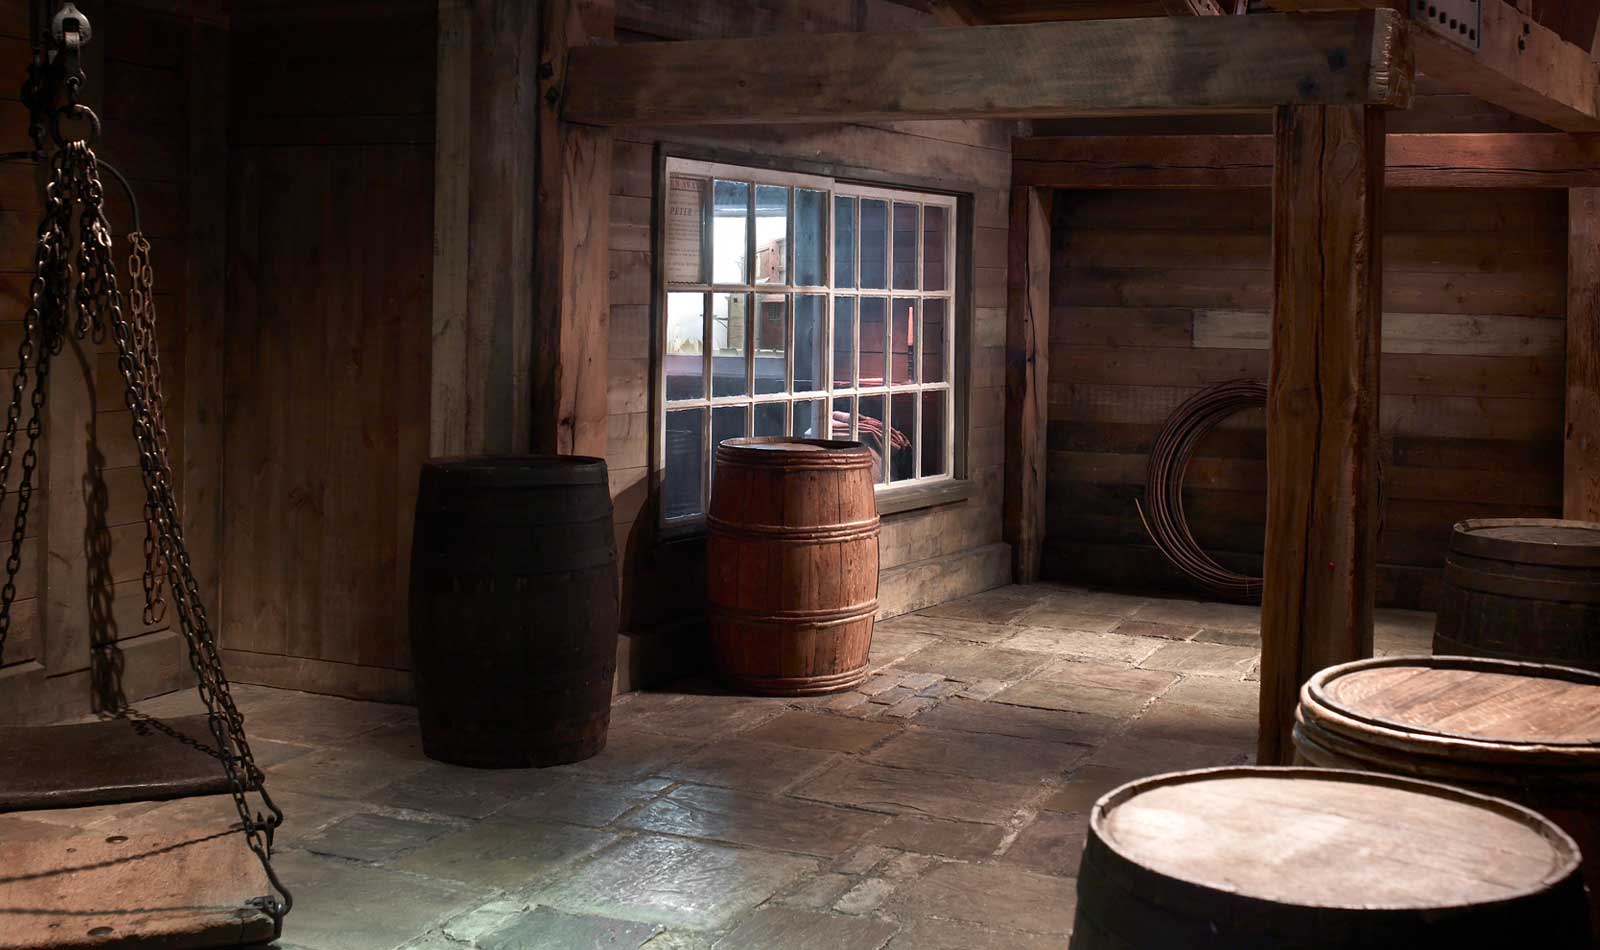 Reconstructed interior of a legal quay from 1700s, Museum of London Docklands.